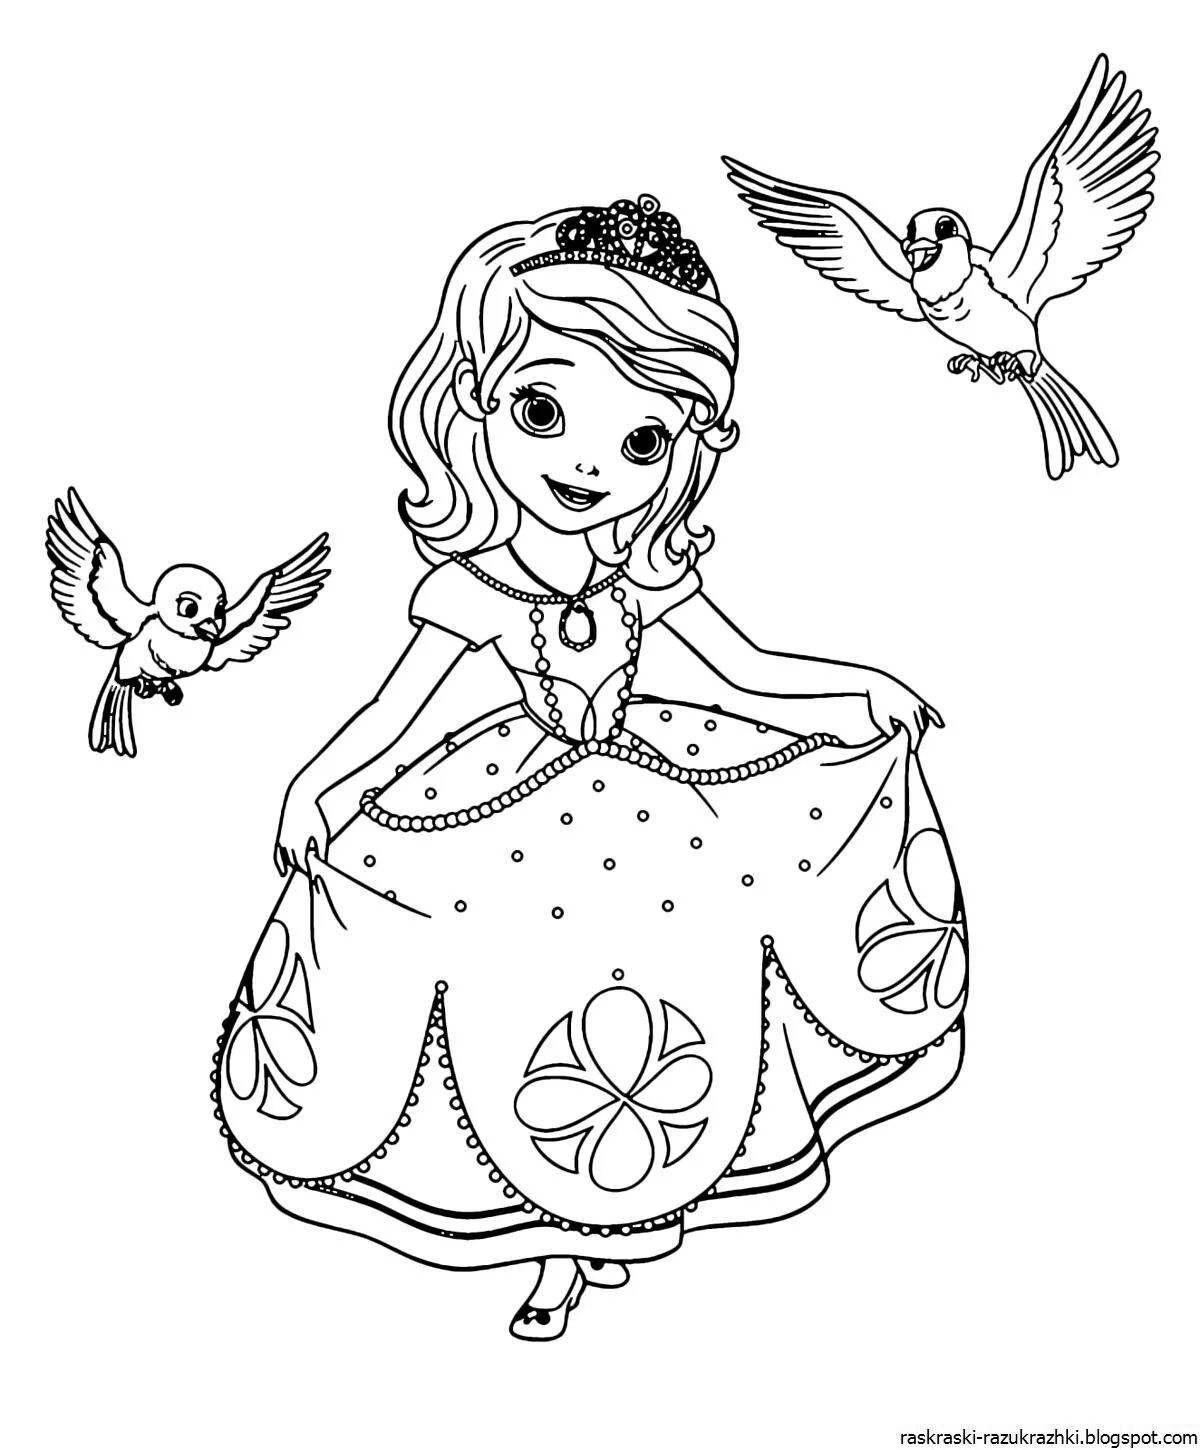 Majestic princess coloring pages 4-5 years old